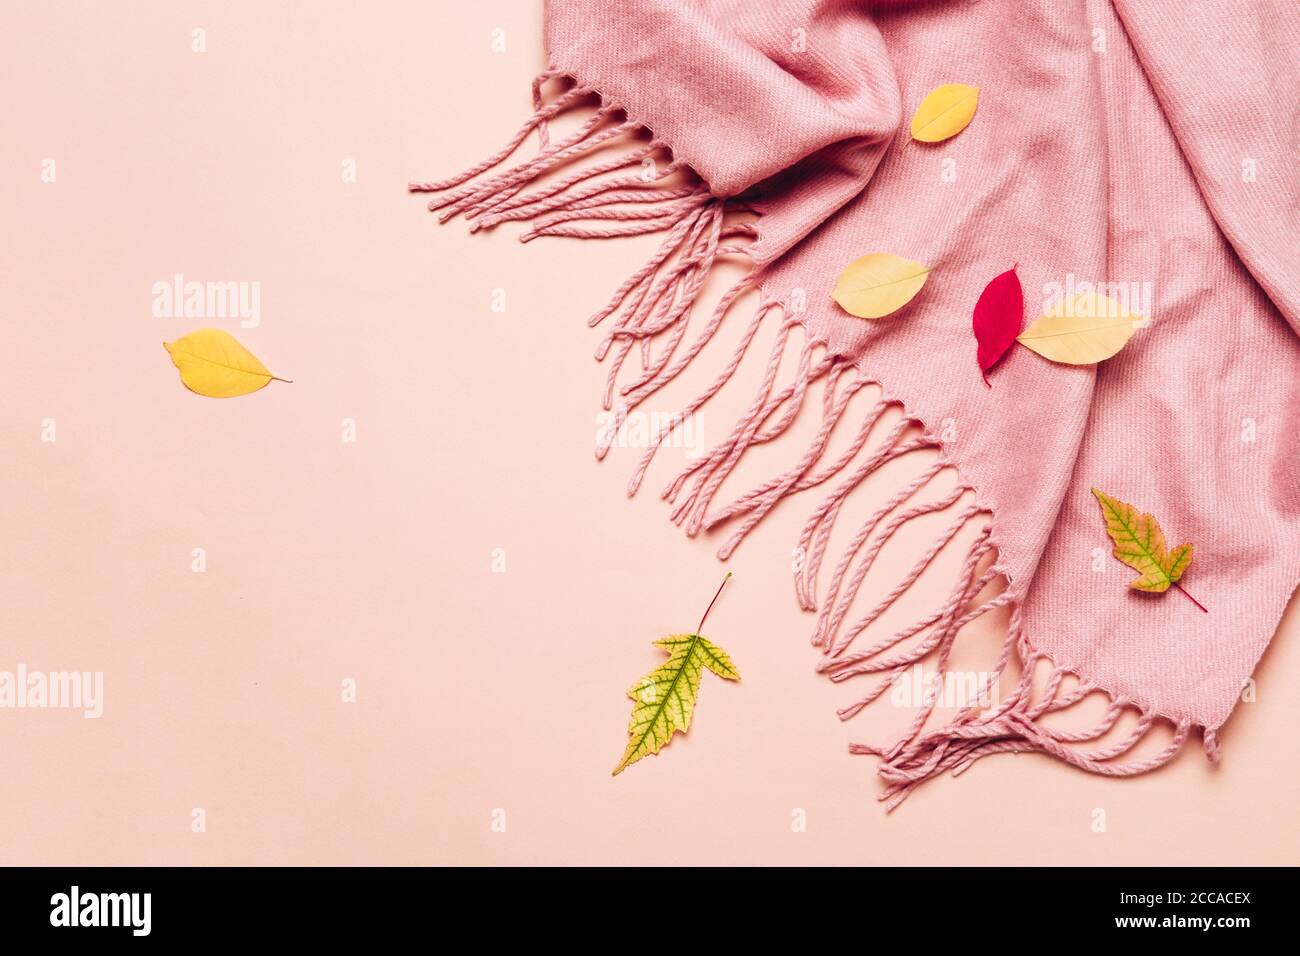 Pink cozy scarf with tassels and scattered leaves on pastel background. Hello autumn concept. Stock Photo